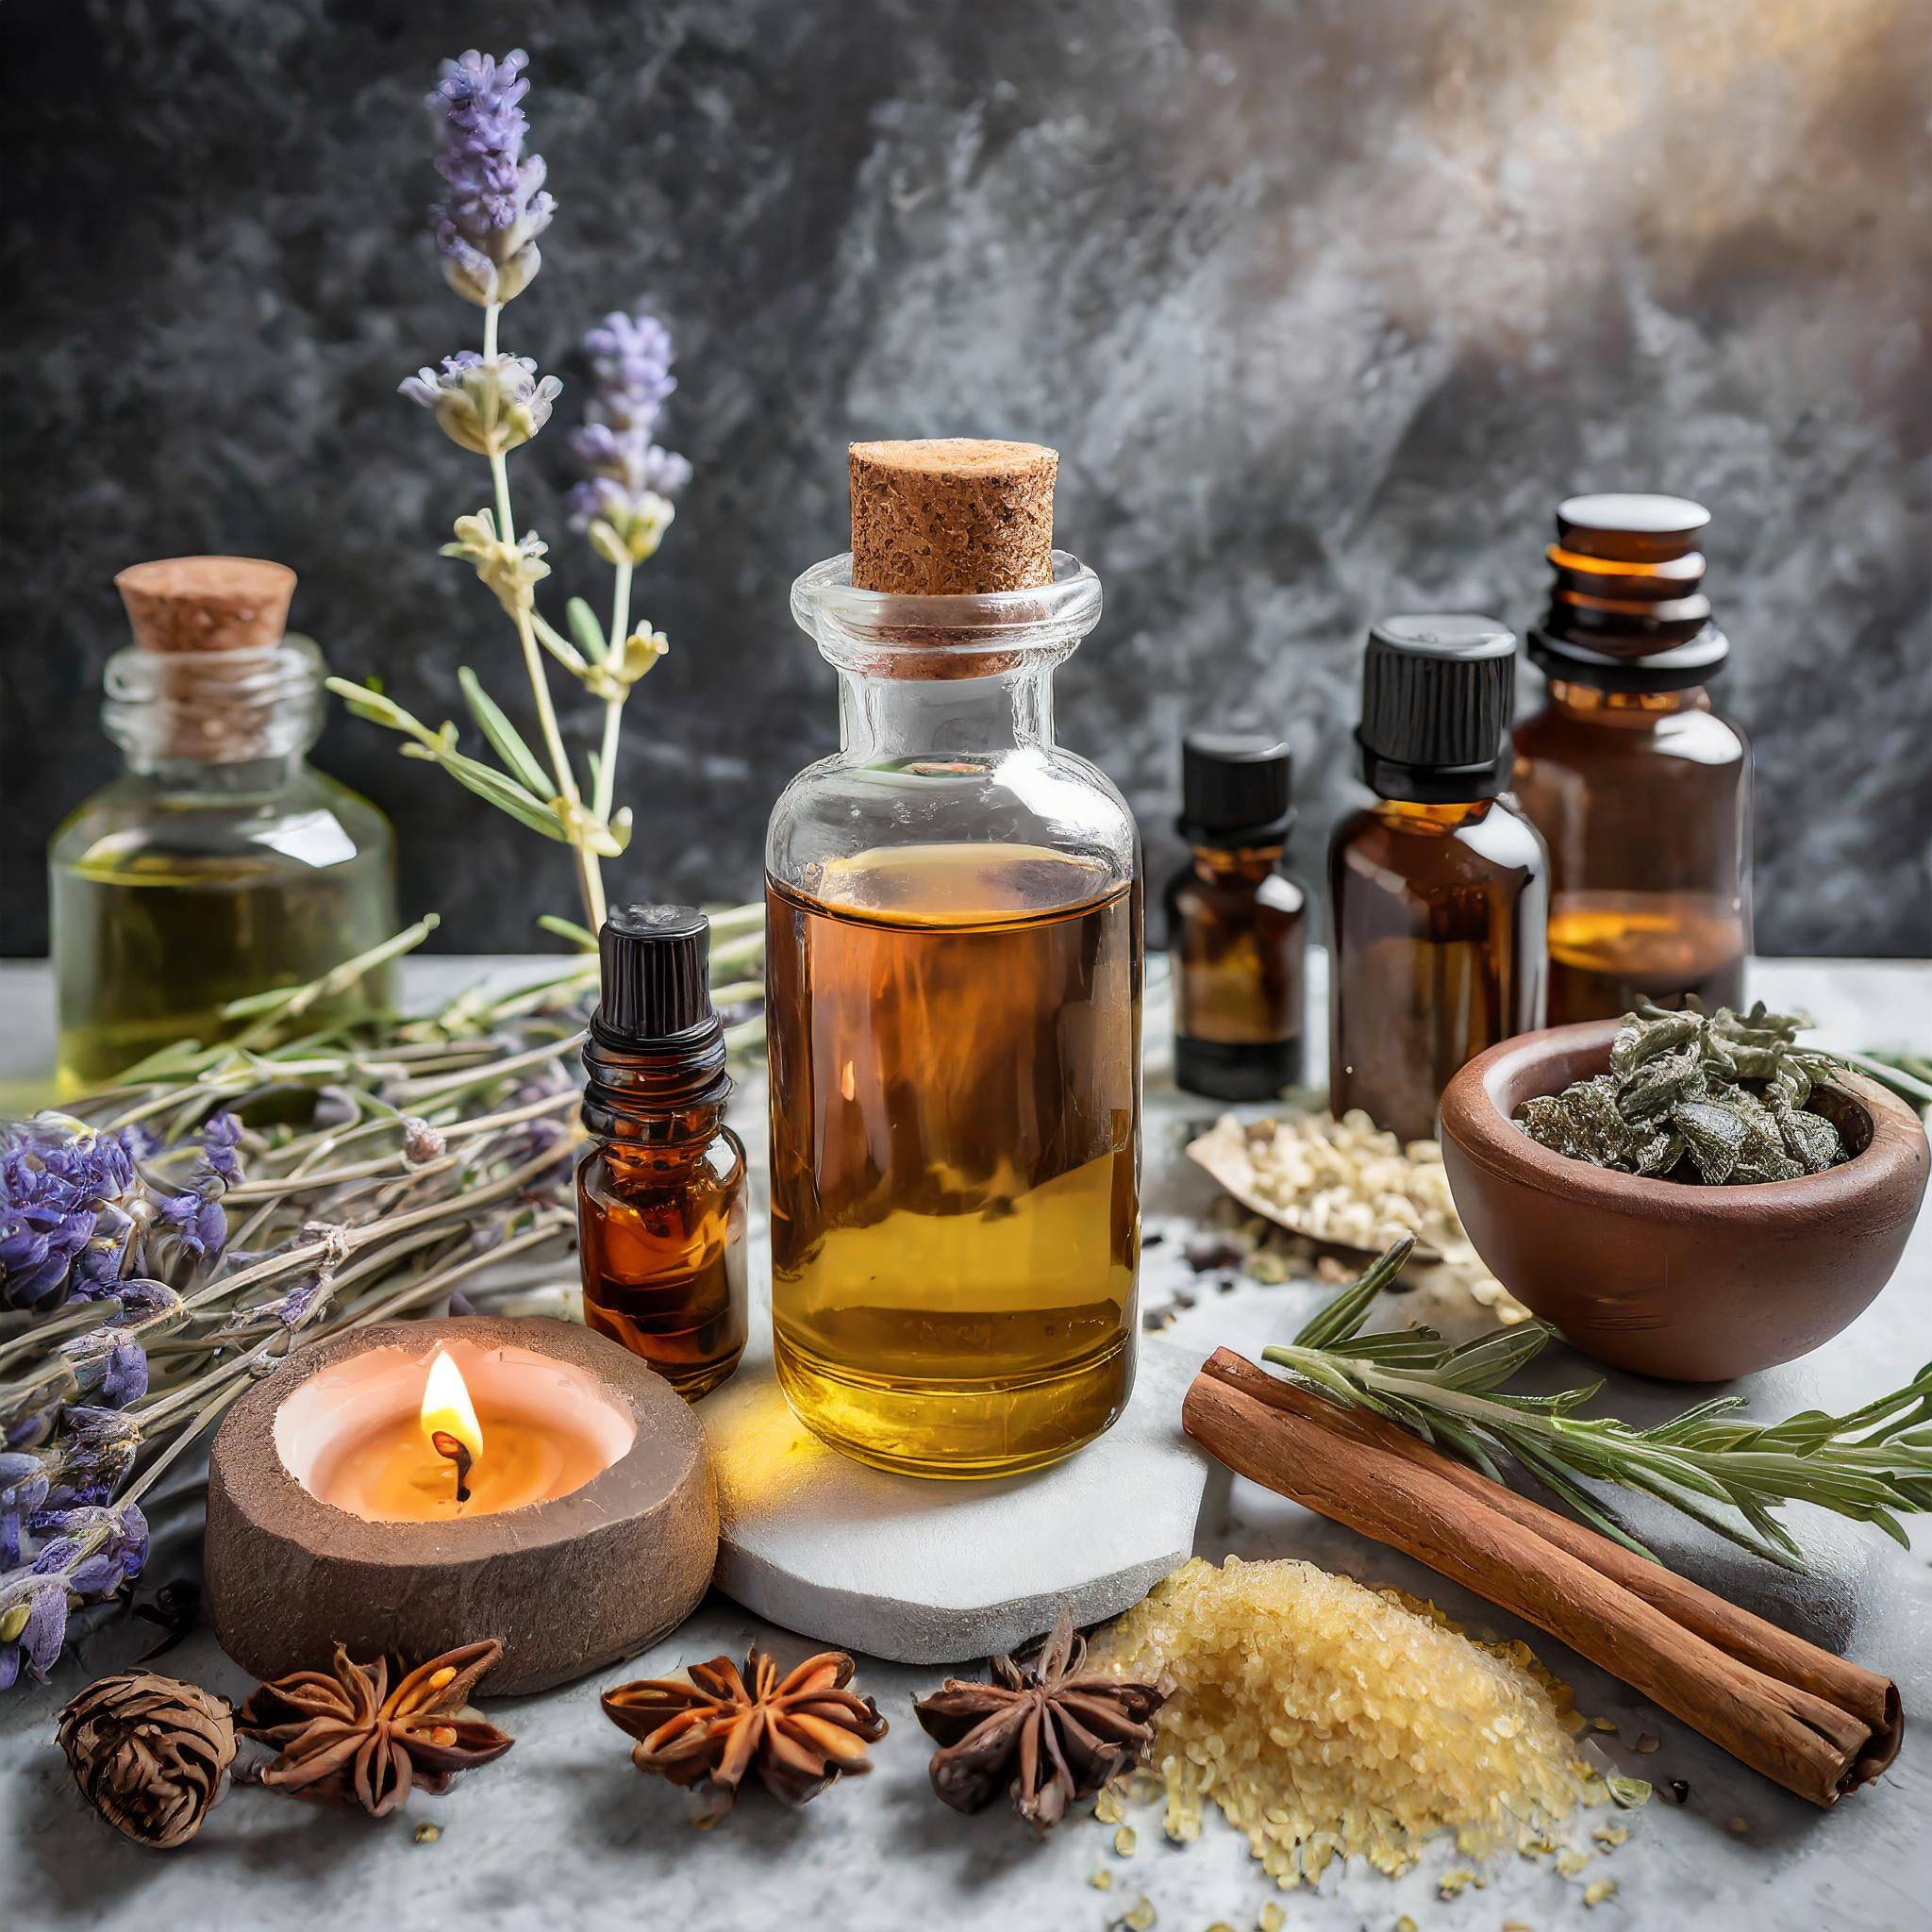 How to implement Aromatherapy in your self-care routine